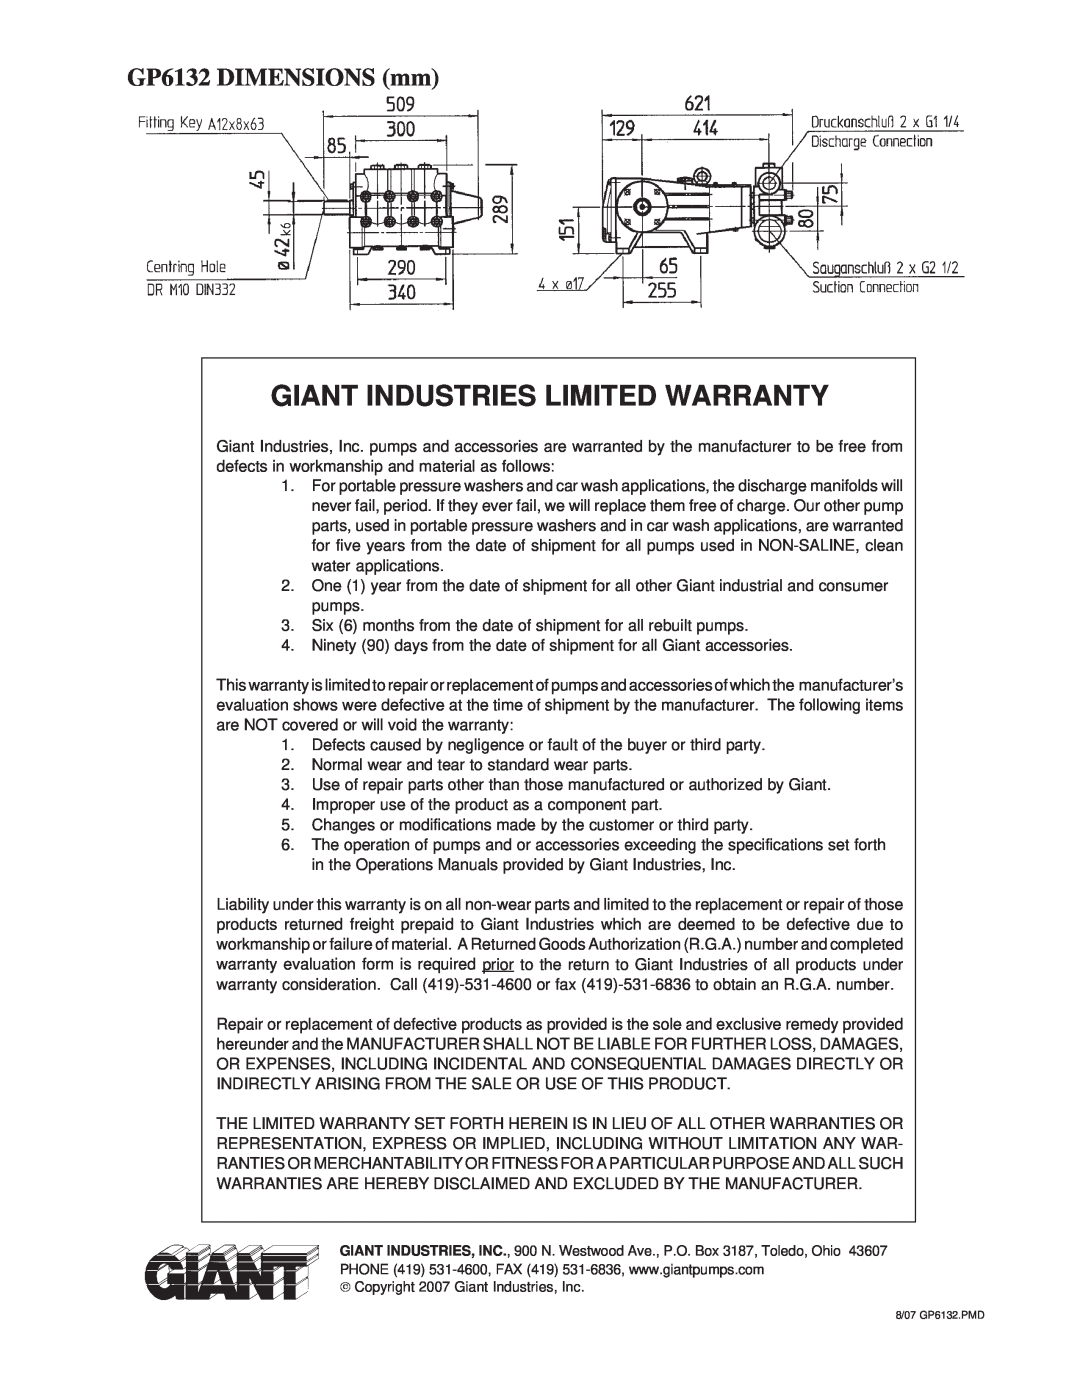 Giant installation instructions GP6132 DIMENSIONS mm, Giant Industries Limited Warranty 